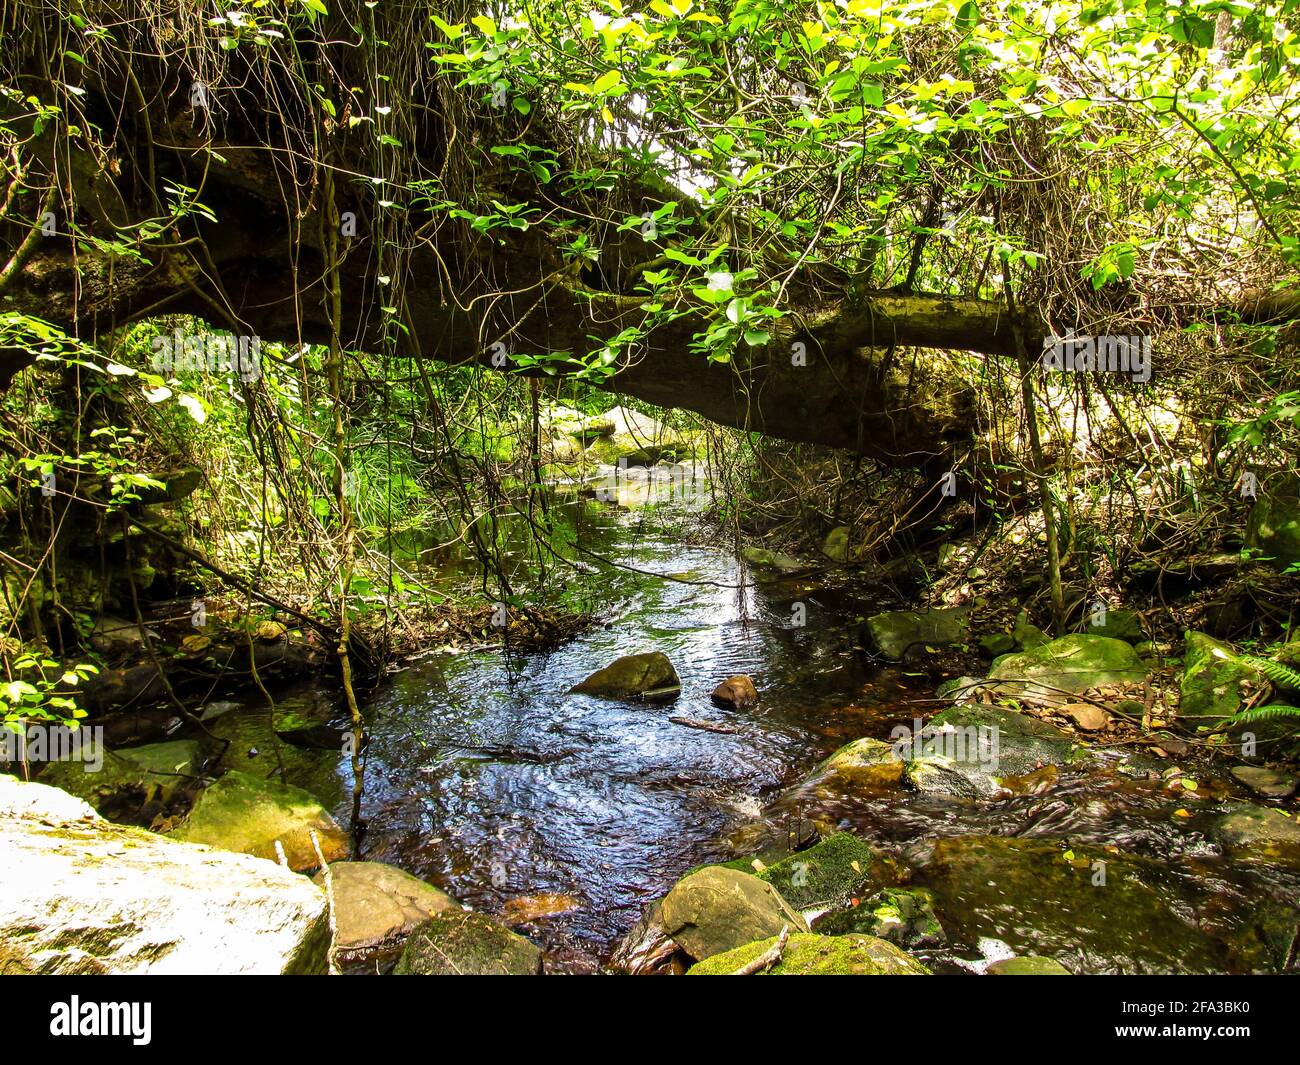 A small stream flowing beneath a fallen tree in the Tsitsikamma forest in the Garden Route National Park, South Africa. Stock Photo